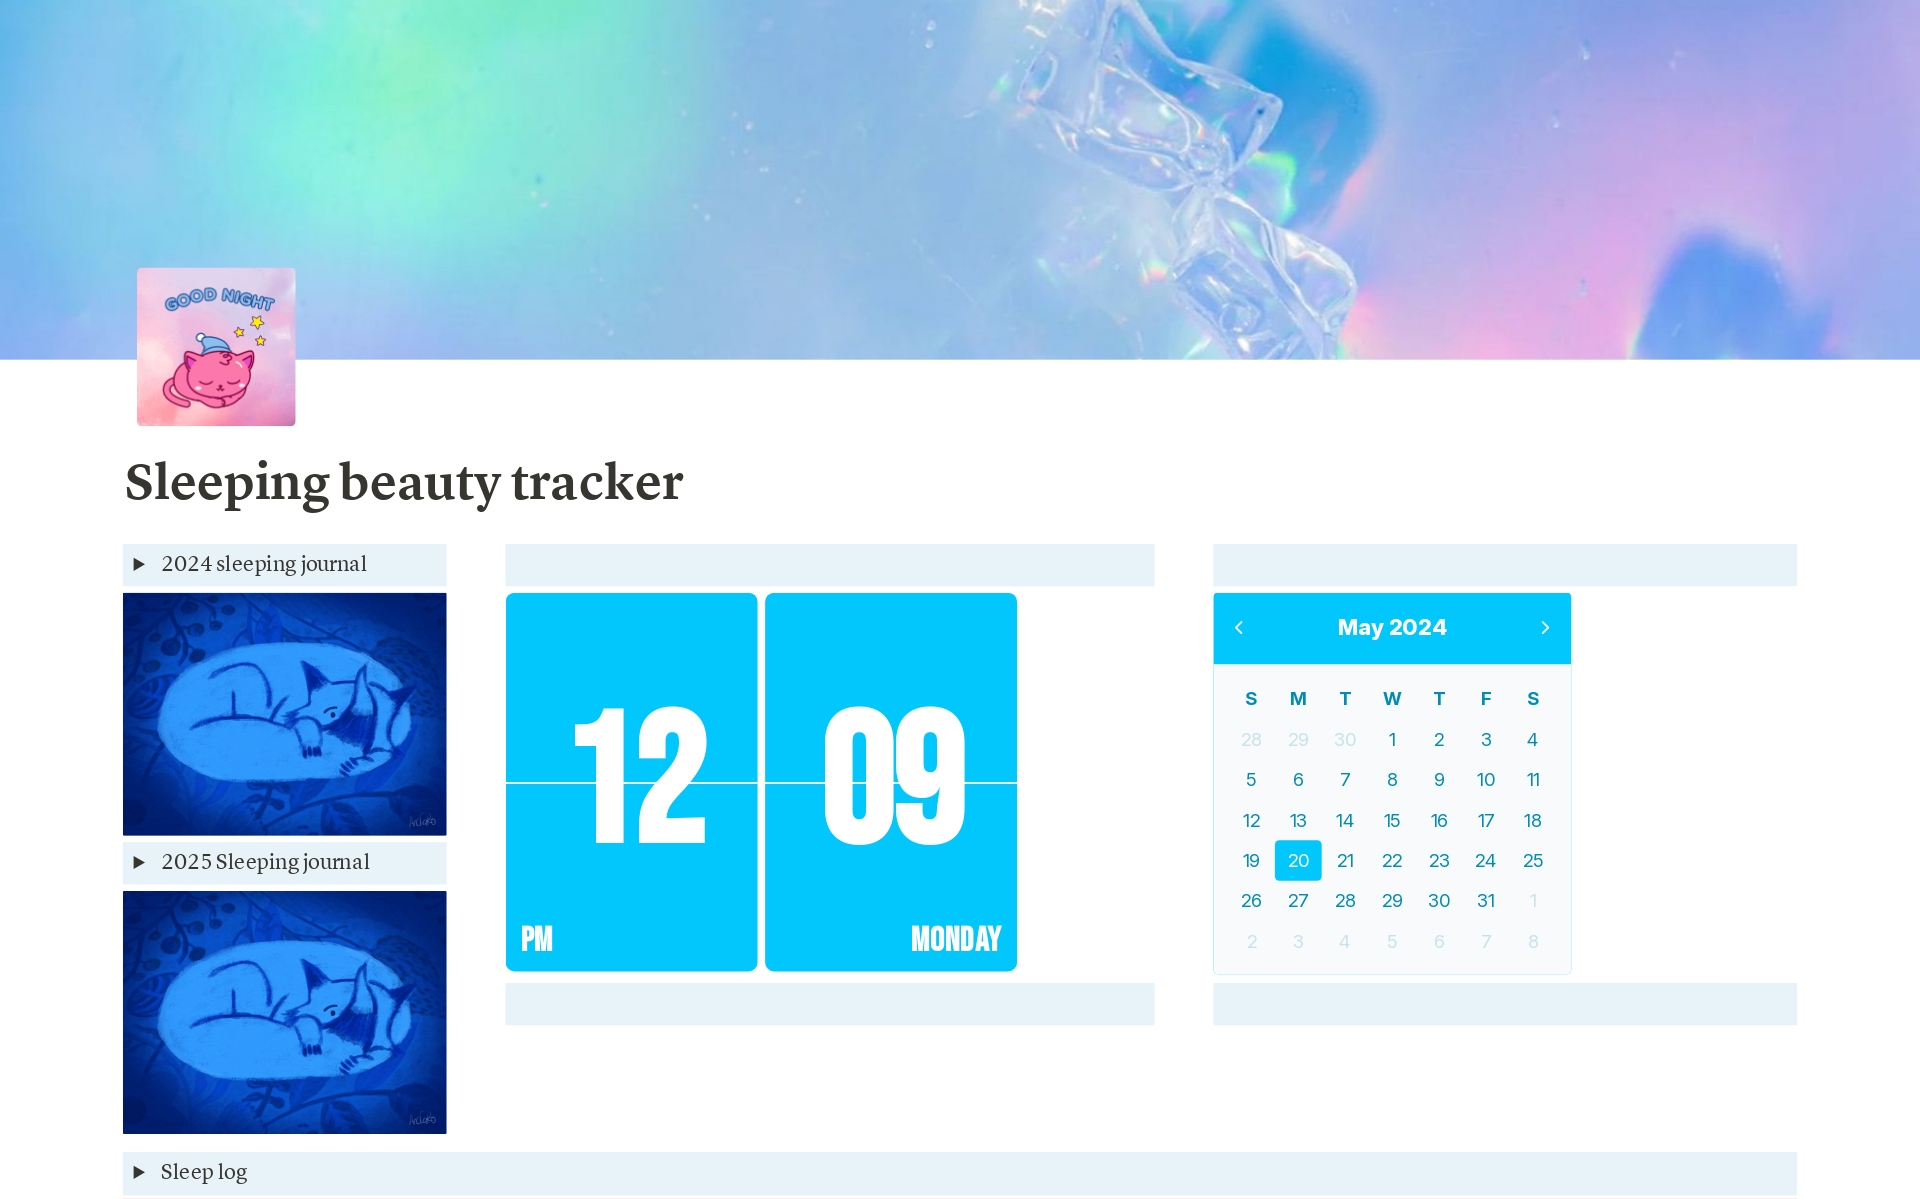 Welcome to Royal but cool notion templates
Happy to introduce our newly released template (Sleeping beauty tracker).
The tracker is divided into 4 sections

﻿﻿1-Clock

﻿﻿2-Calendar

﻿﻿3-Sleeping journal

﻿﻿4-Sleep log (table)
